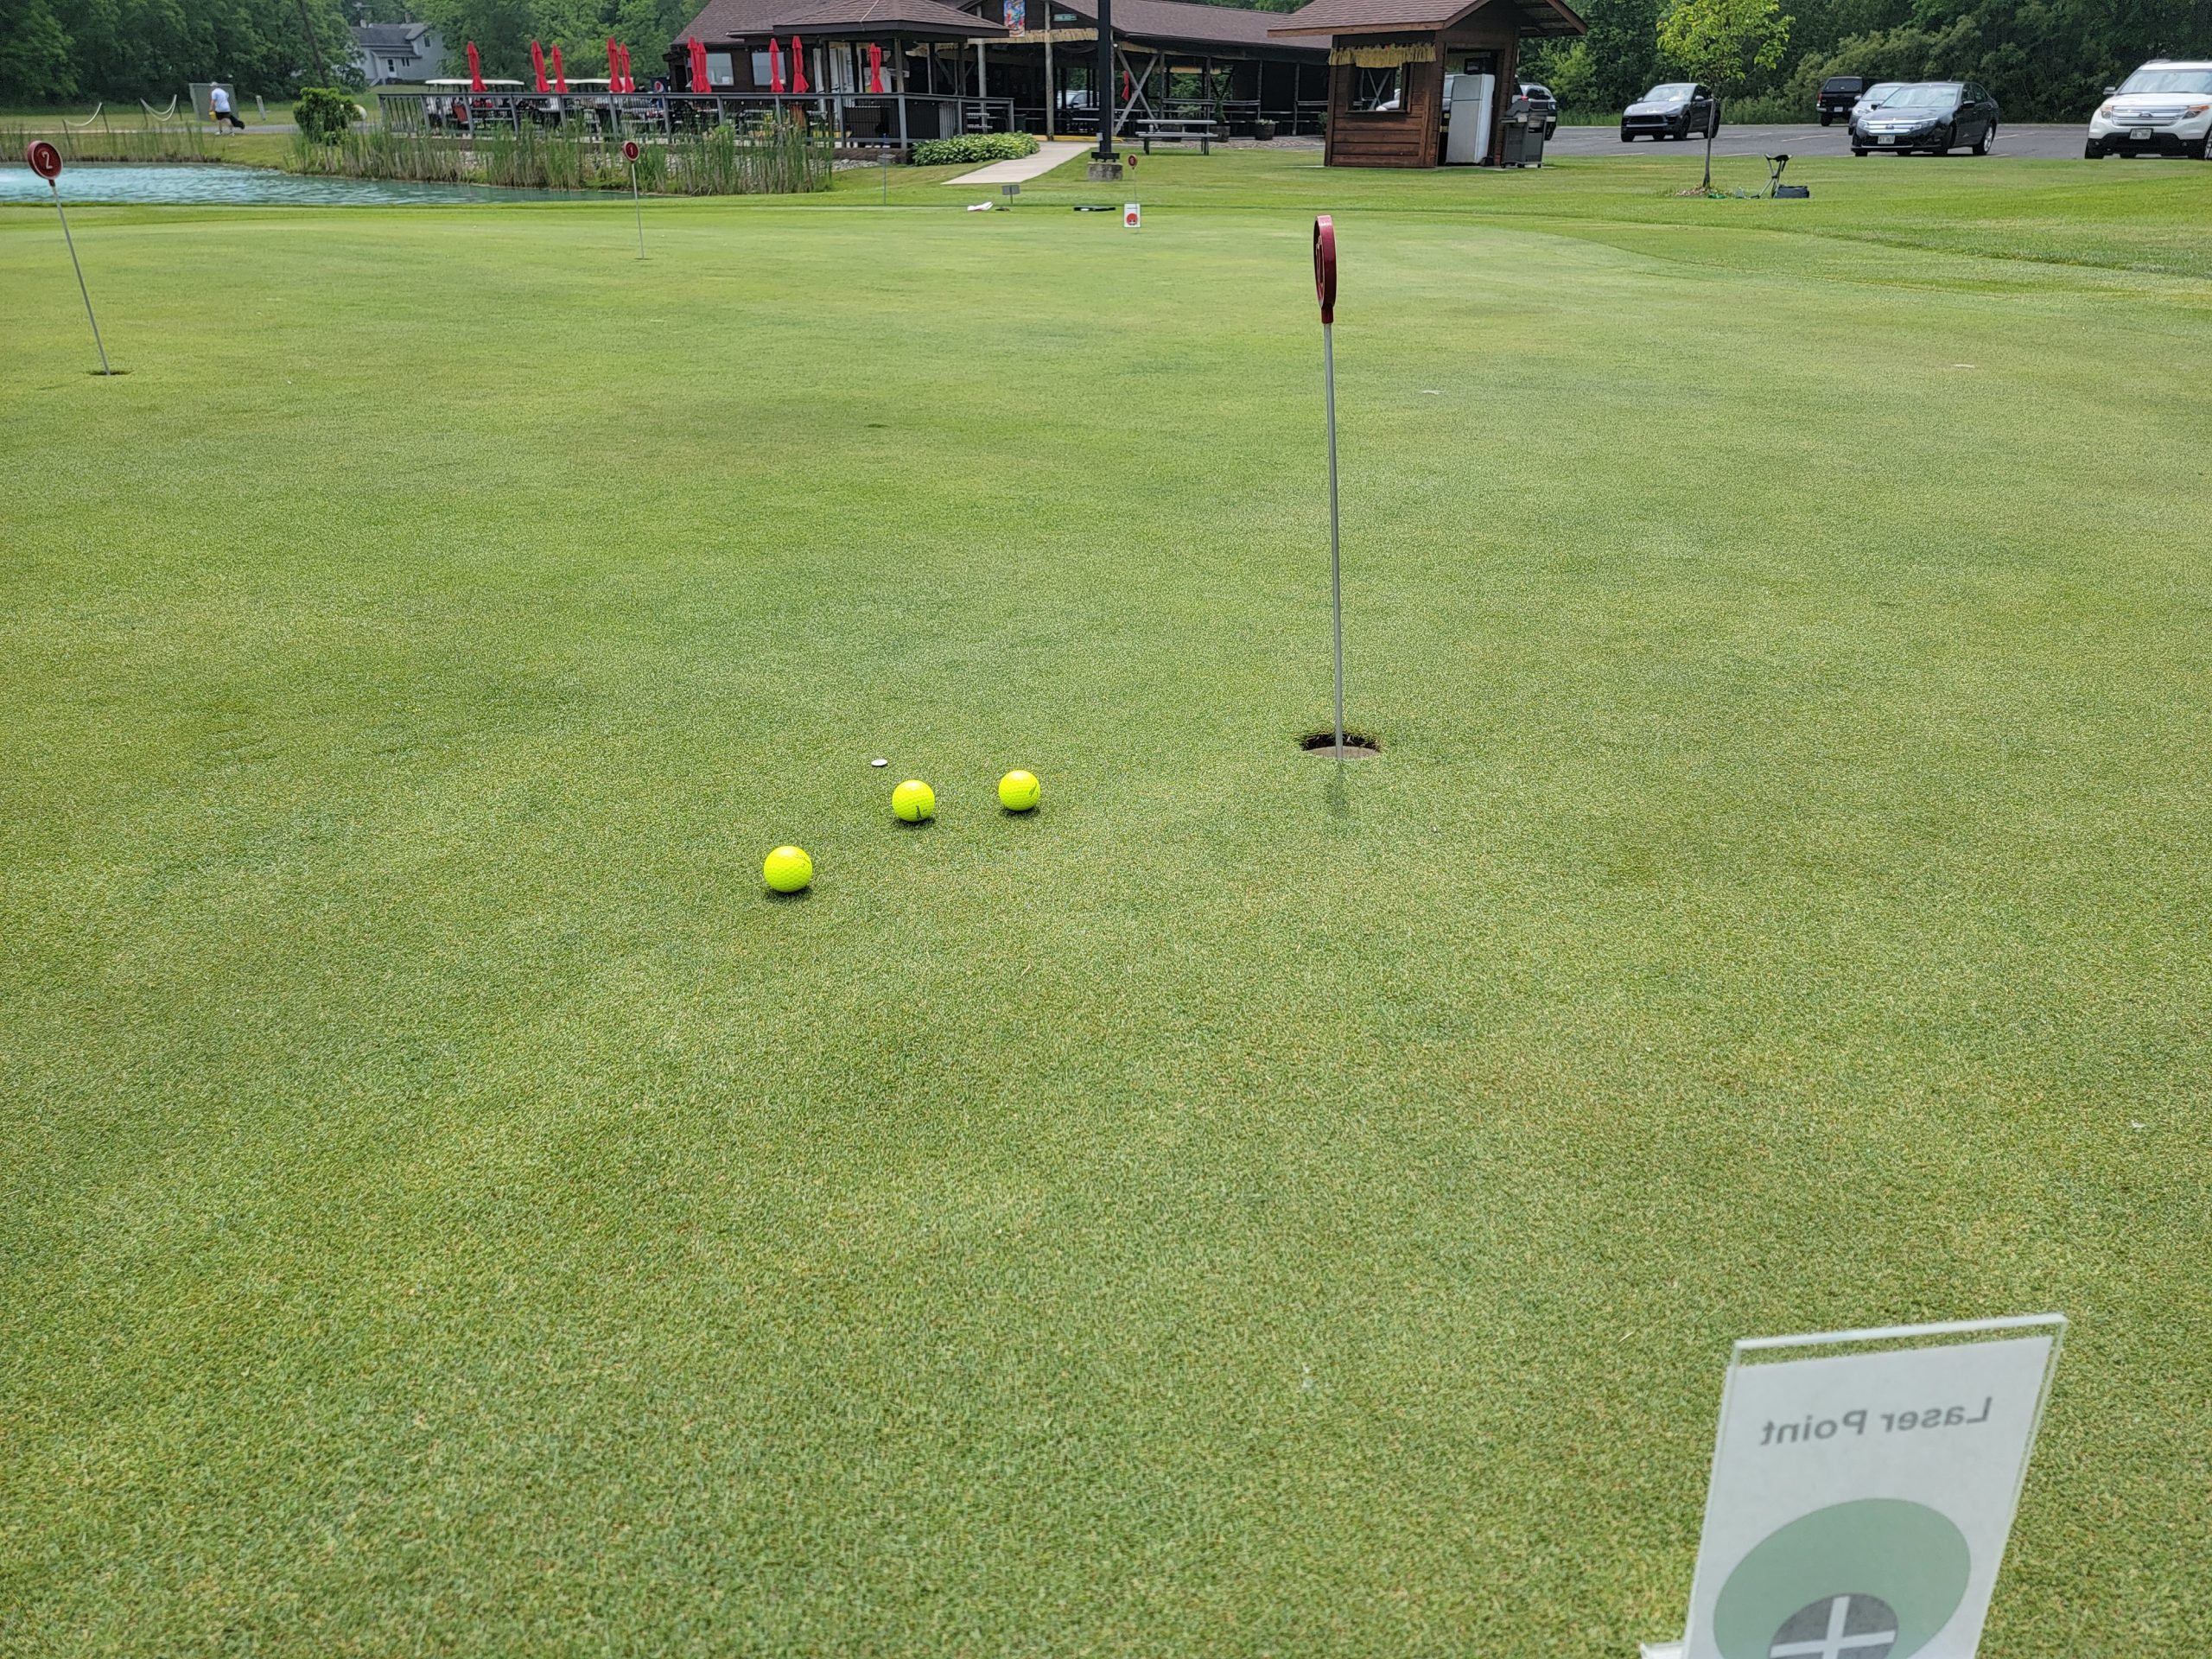 Old Duffer Golf image of a 40 foot putt during a putting: two hour practice